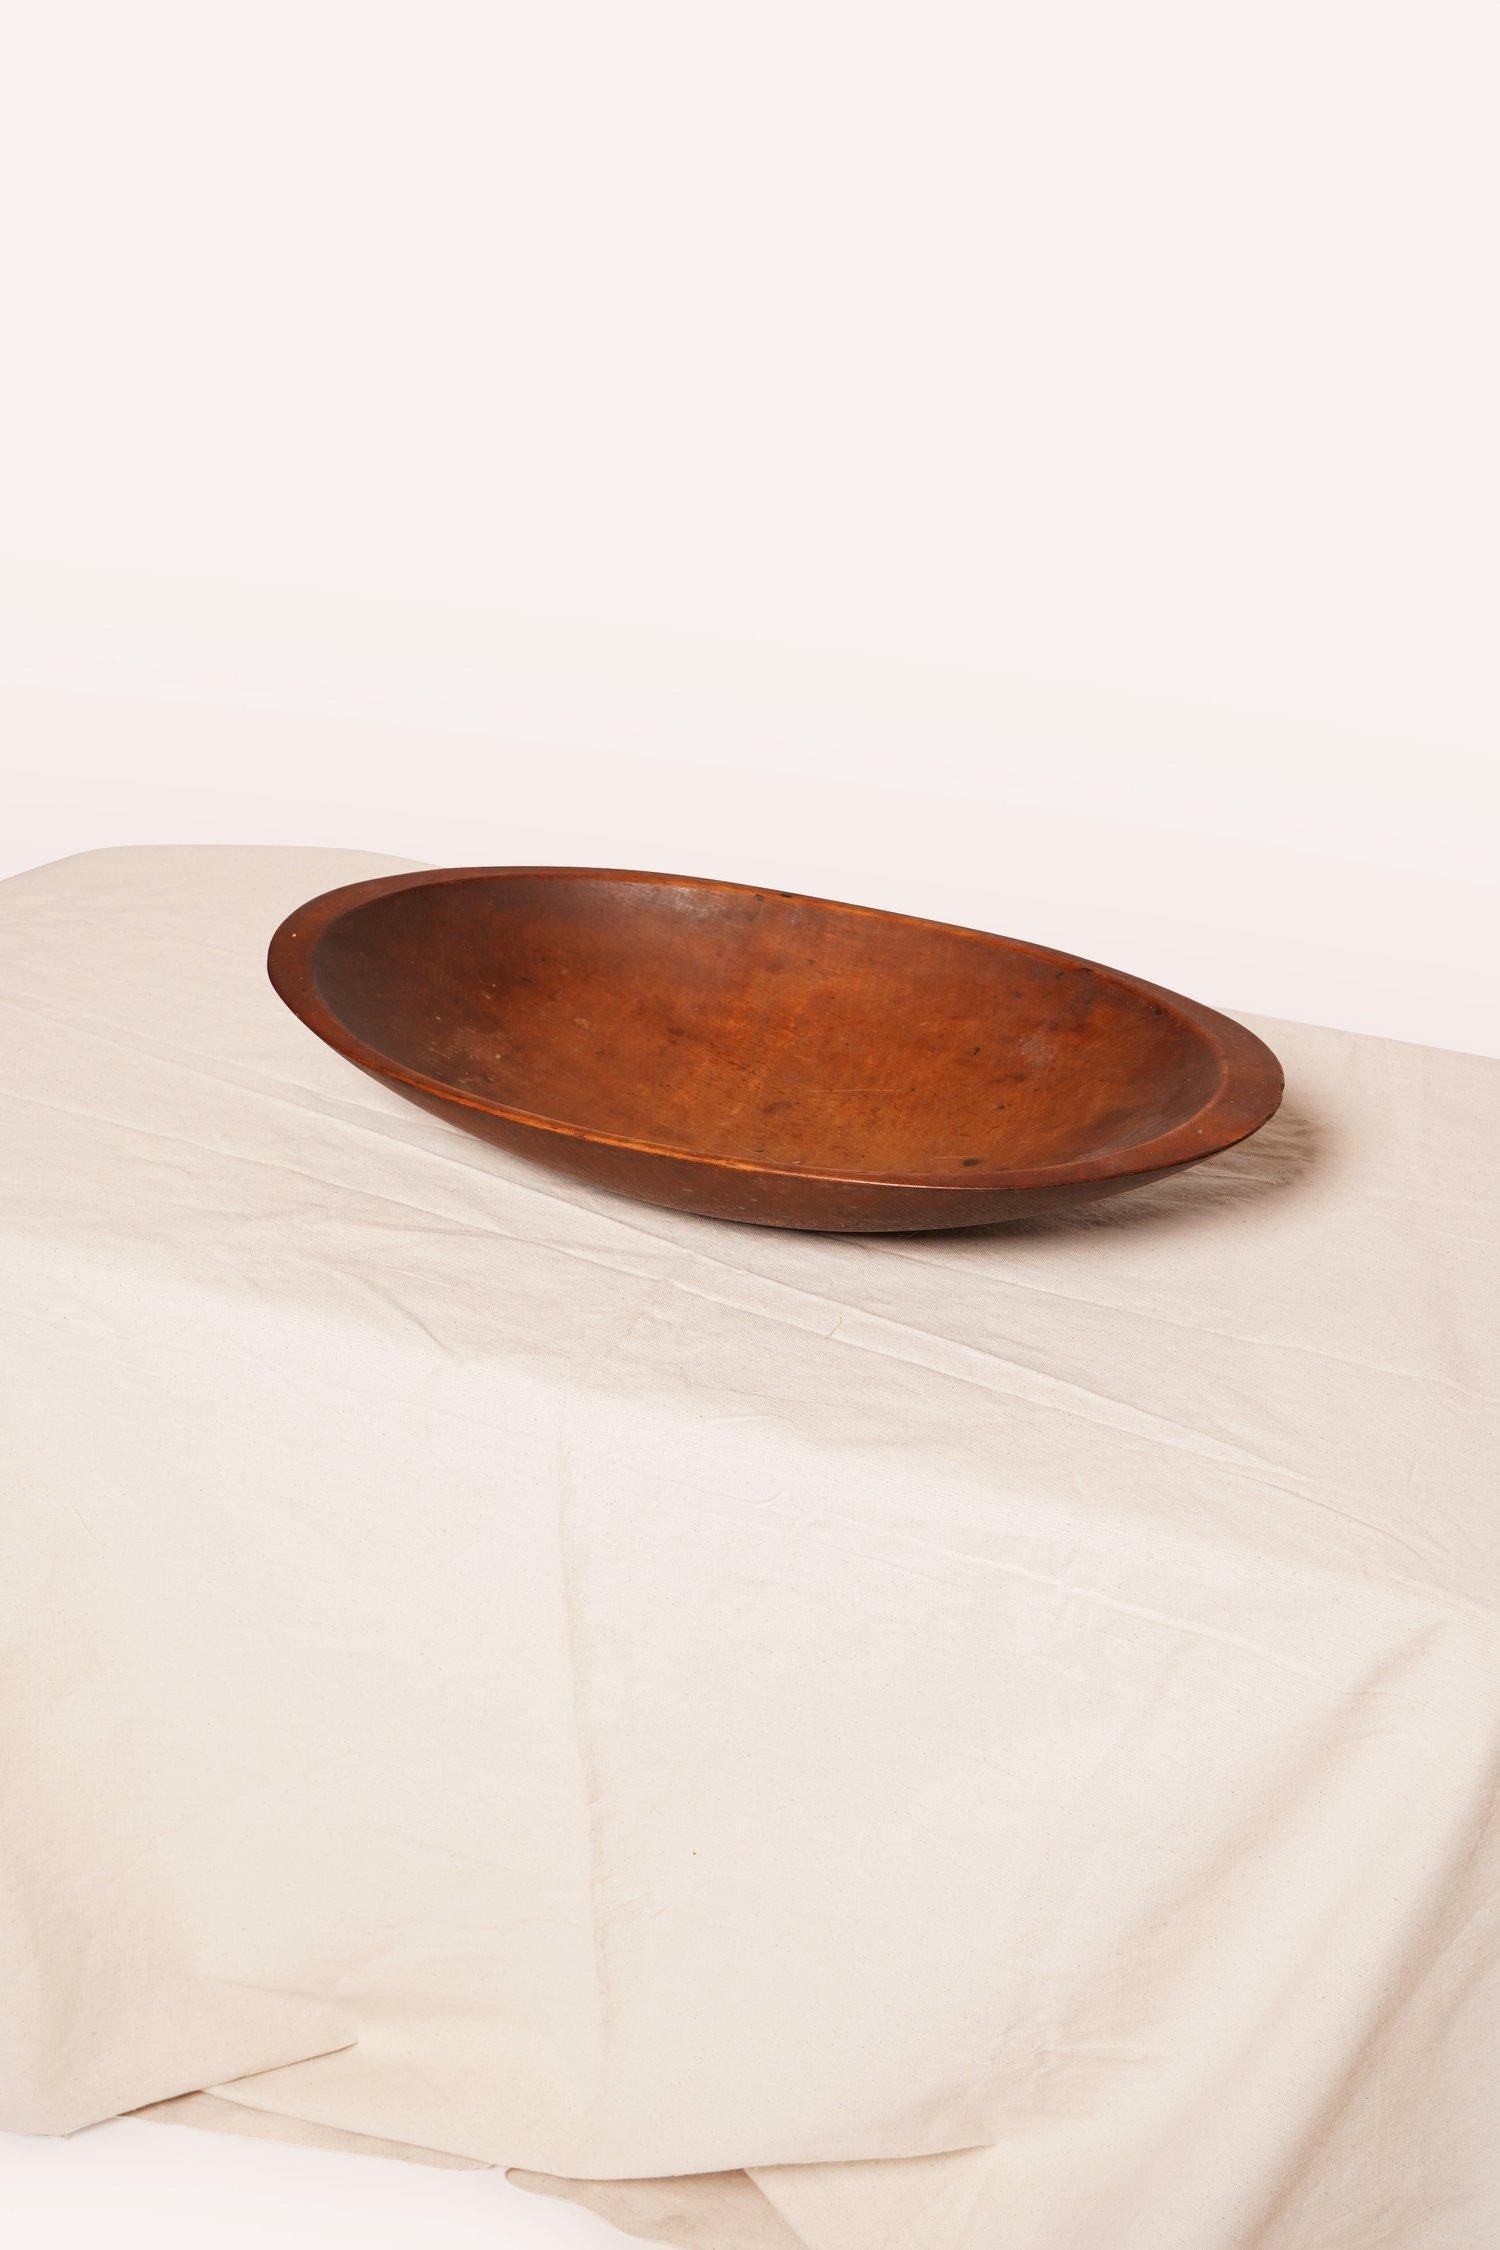 This trencher large oval wooden dough bowl was traditionally used to prepare dough in the 19th century. This bowl can be used for storage or displaying as is.